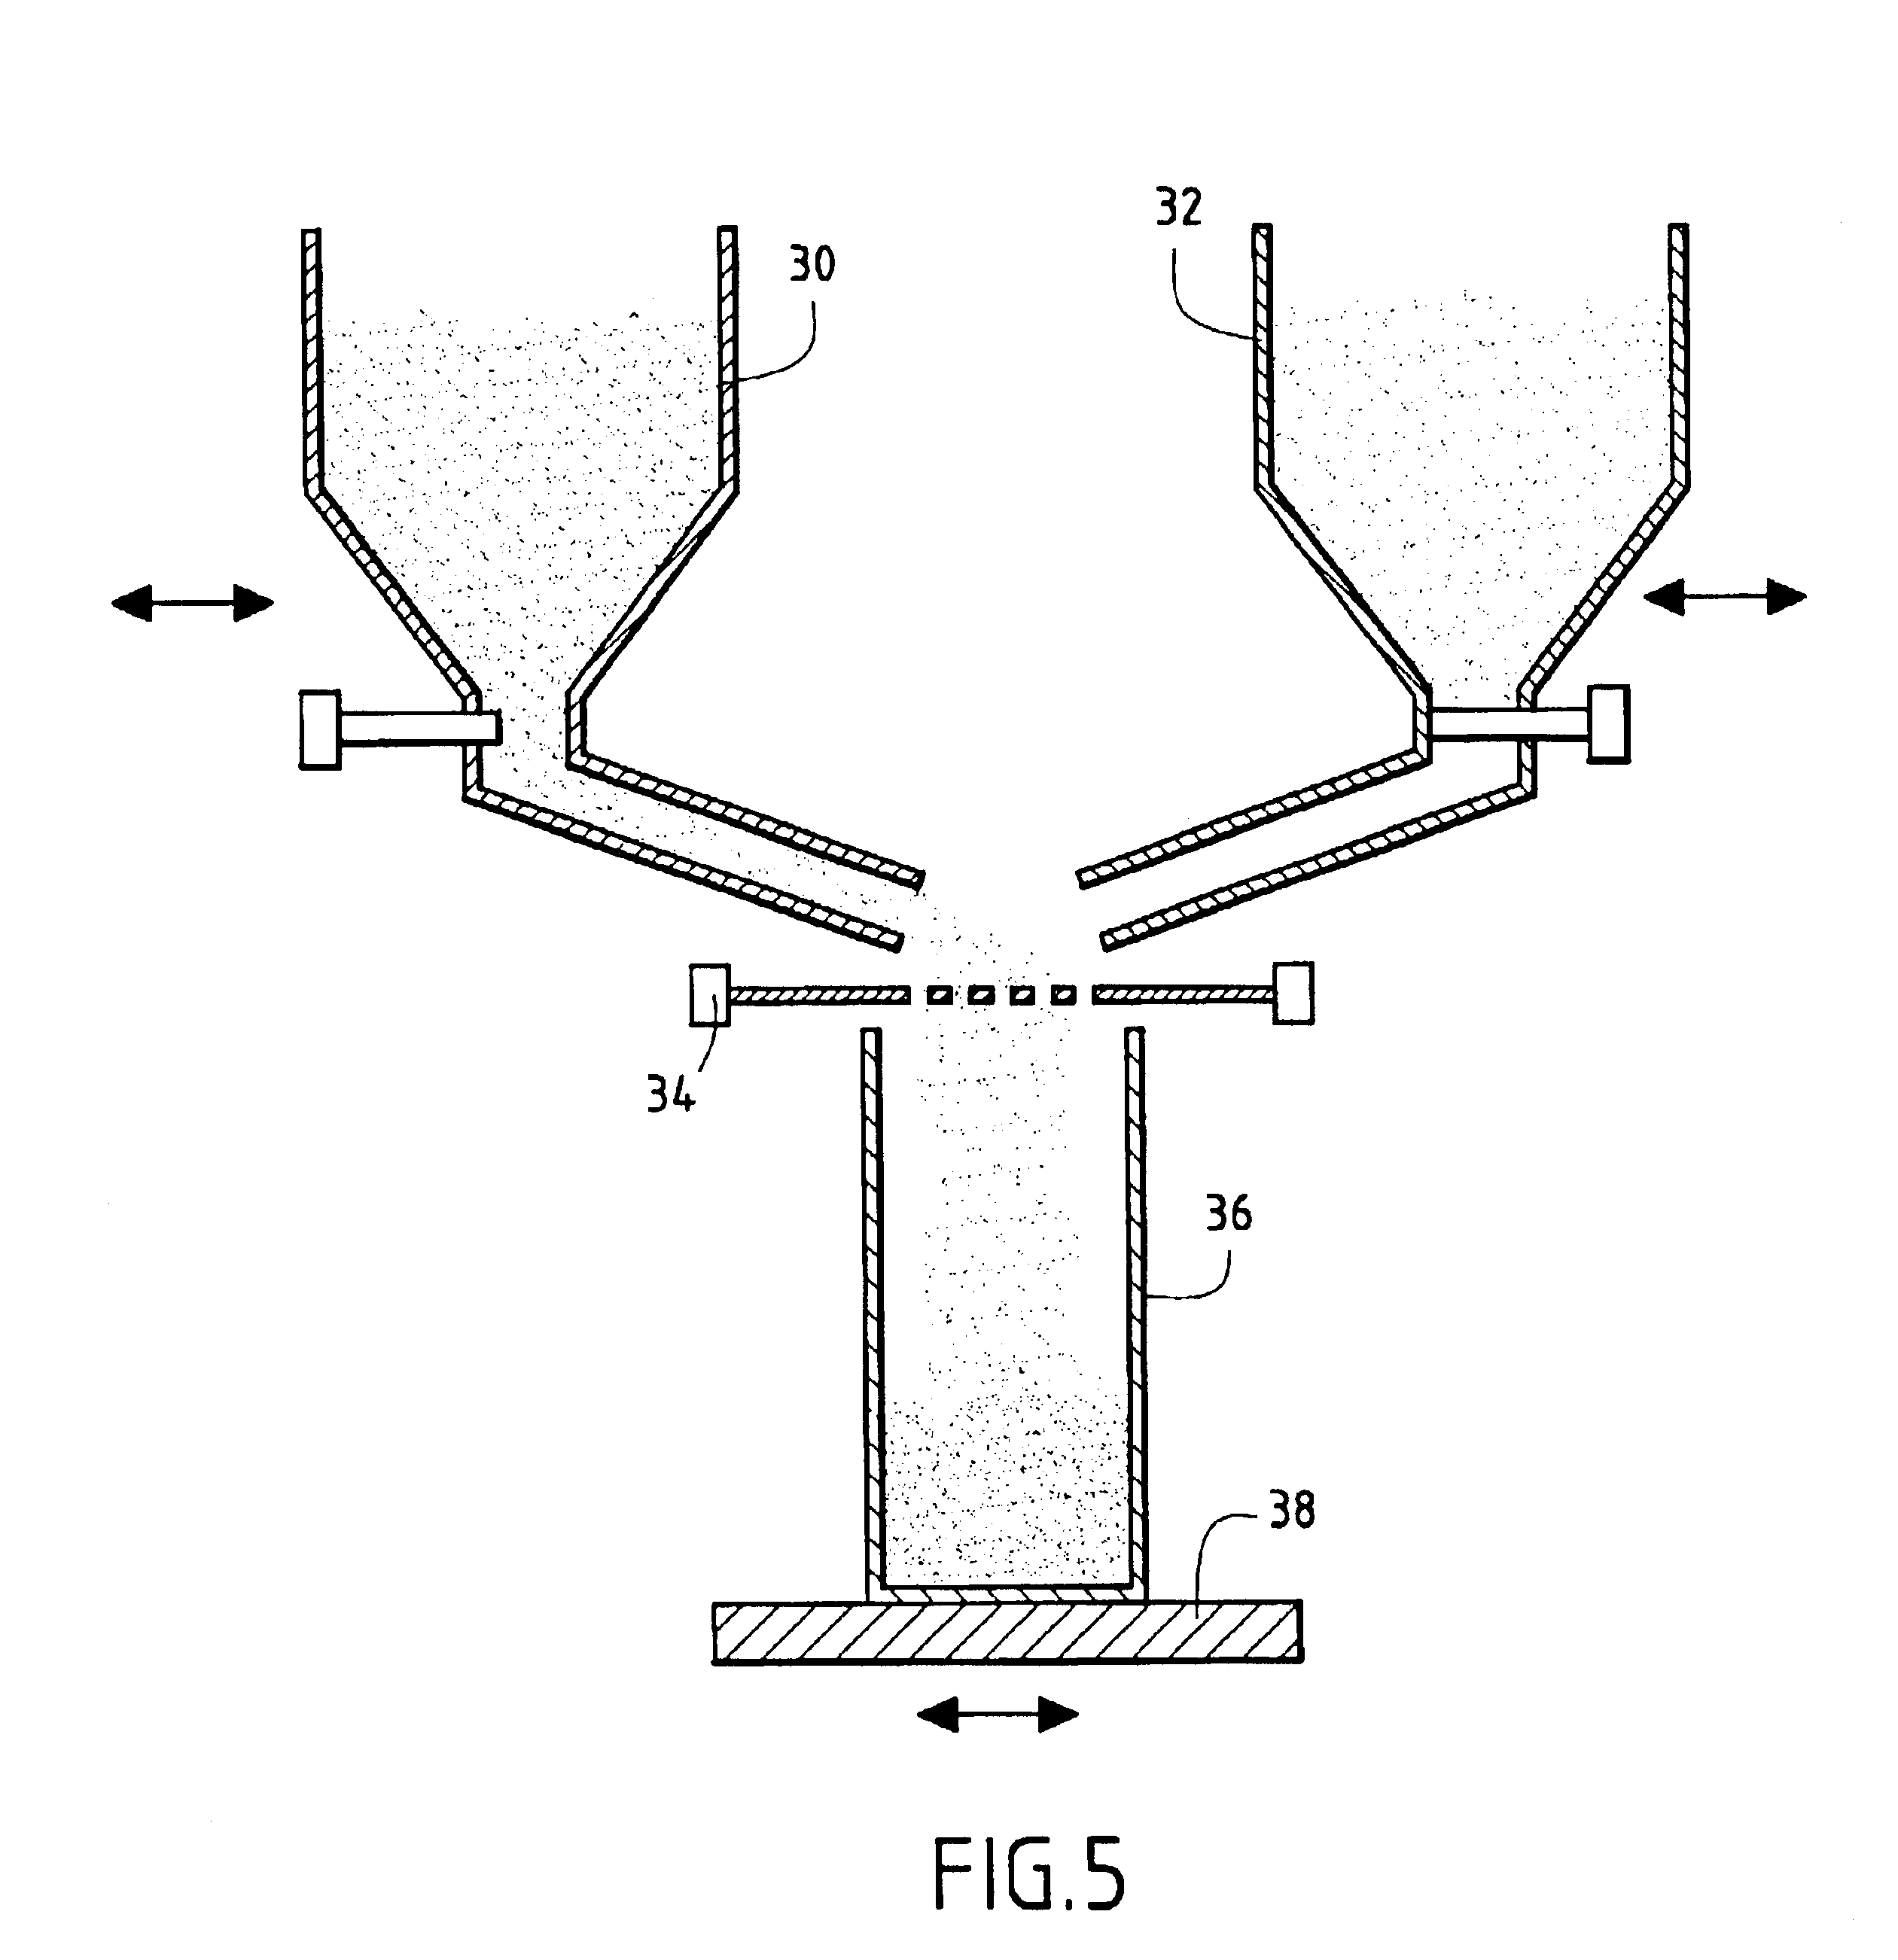 Method of forming a ceramic coating on a substrate by electron-beam physical vapor deposition